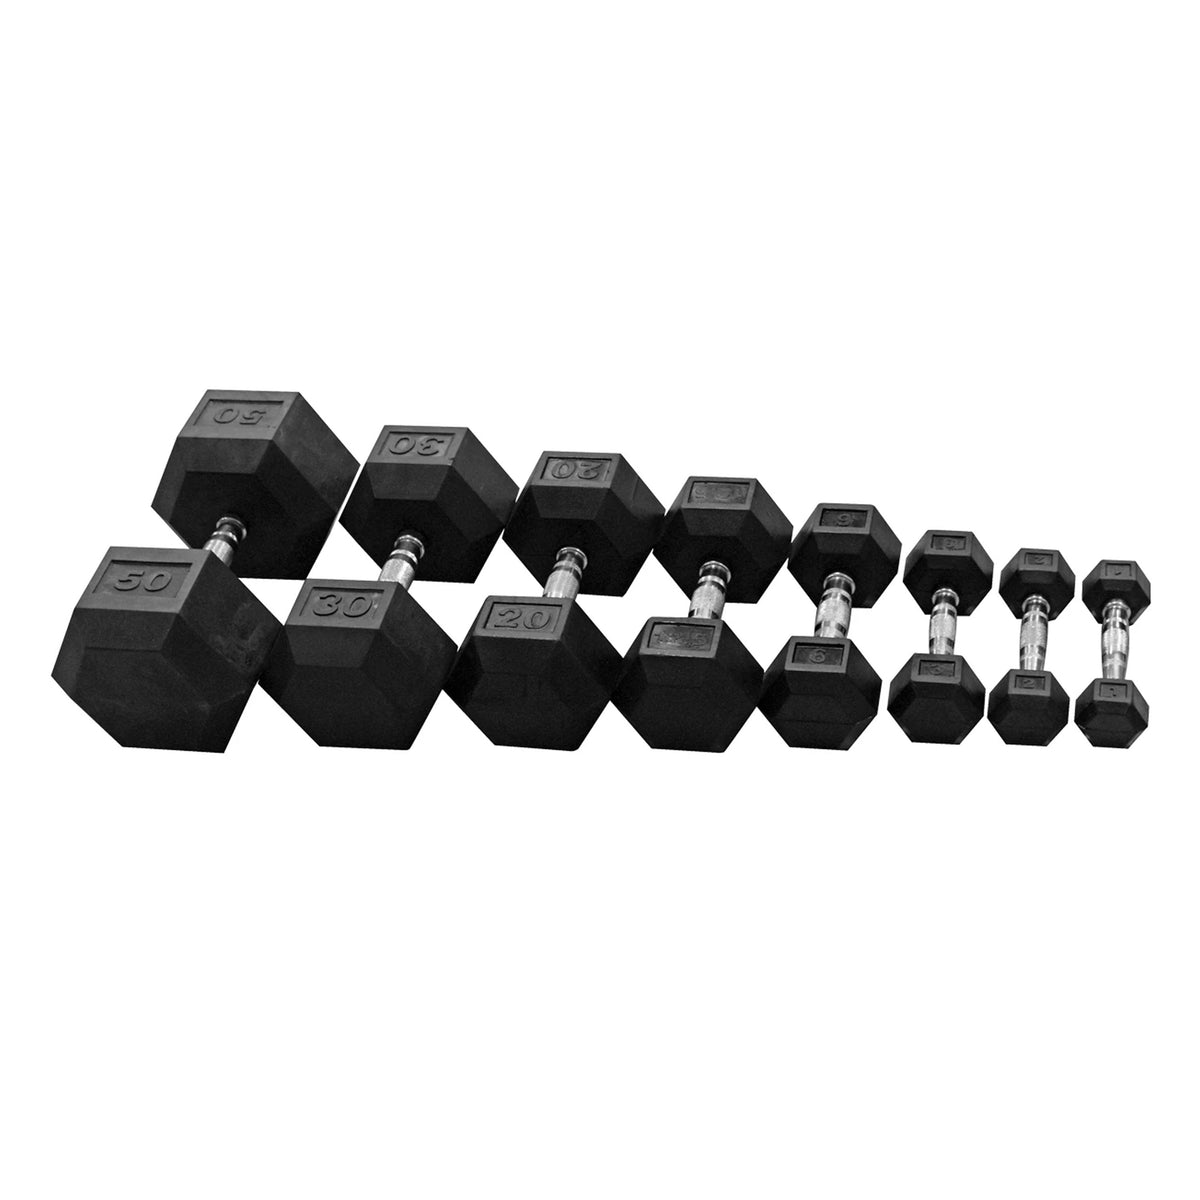 FitWay Equip. Rubber Hex Dumbbell Pair - 40lb